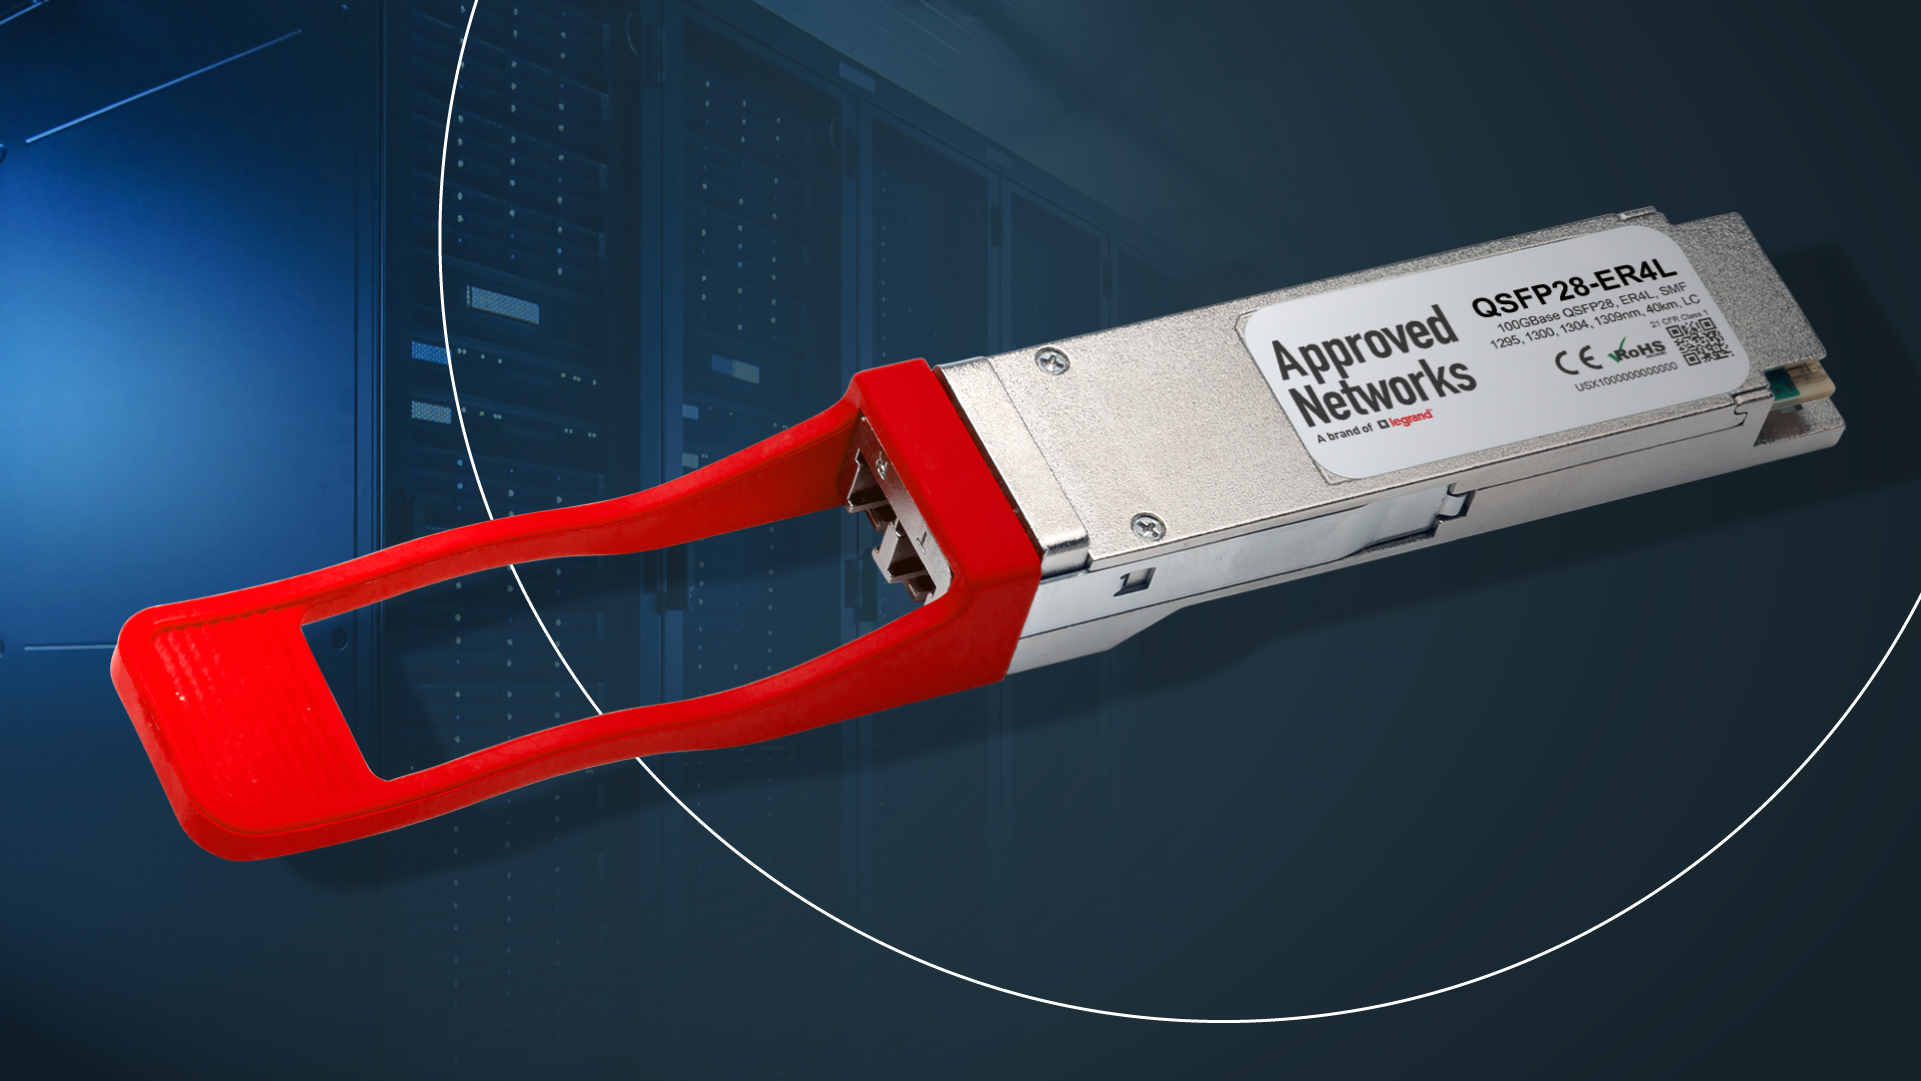 An Approved Networks QSFP28 optical transceiver